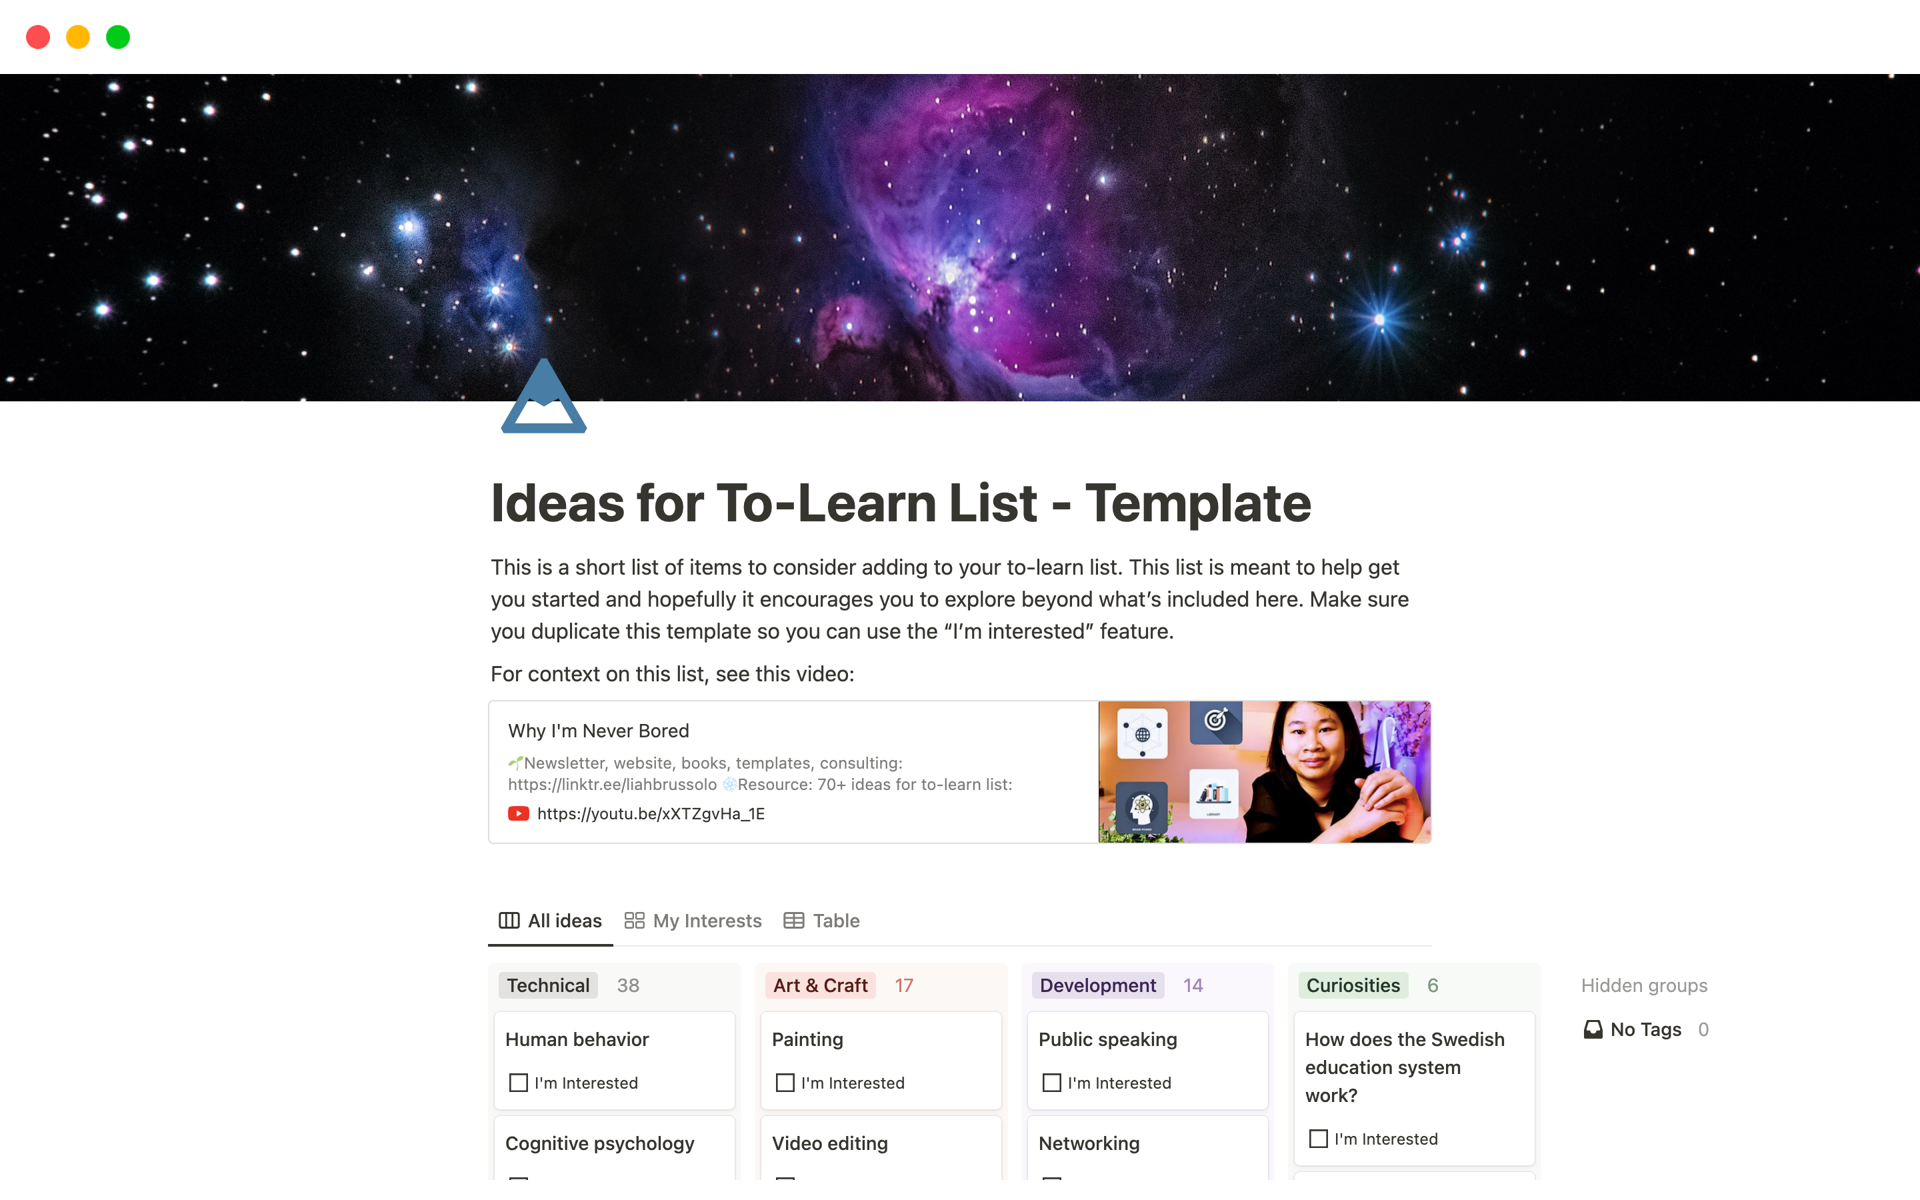 Ideas for To-Learn Listのテンプレートのプレビュー